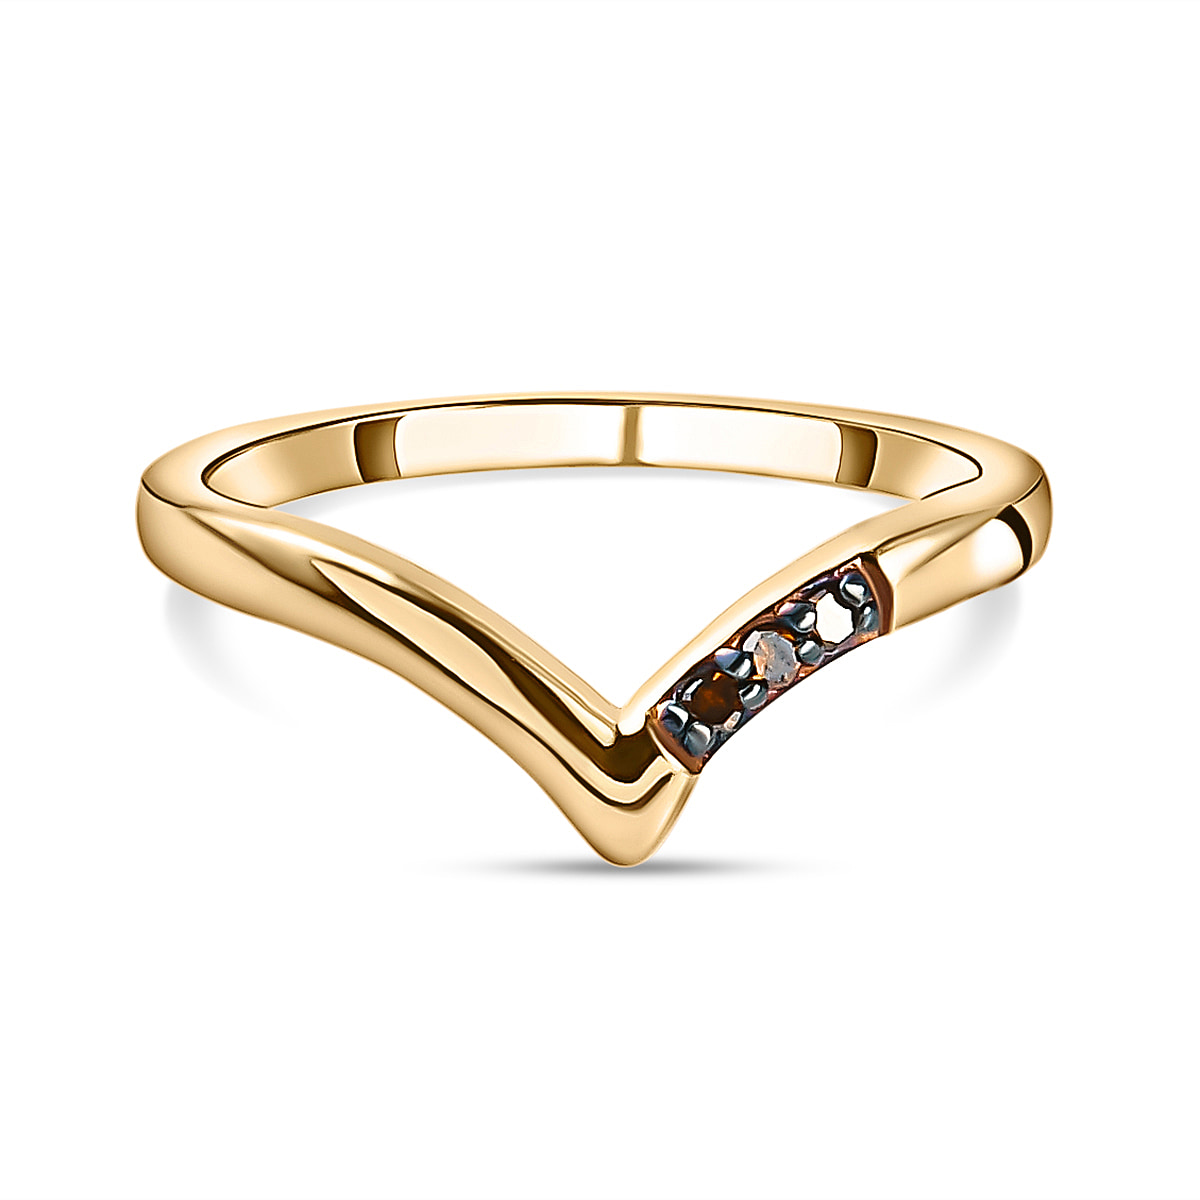 Red Diamond Wishbone Wedding Band Ring in 14K Gold Plated Sterling Silver